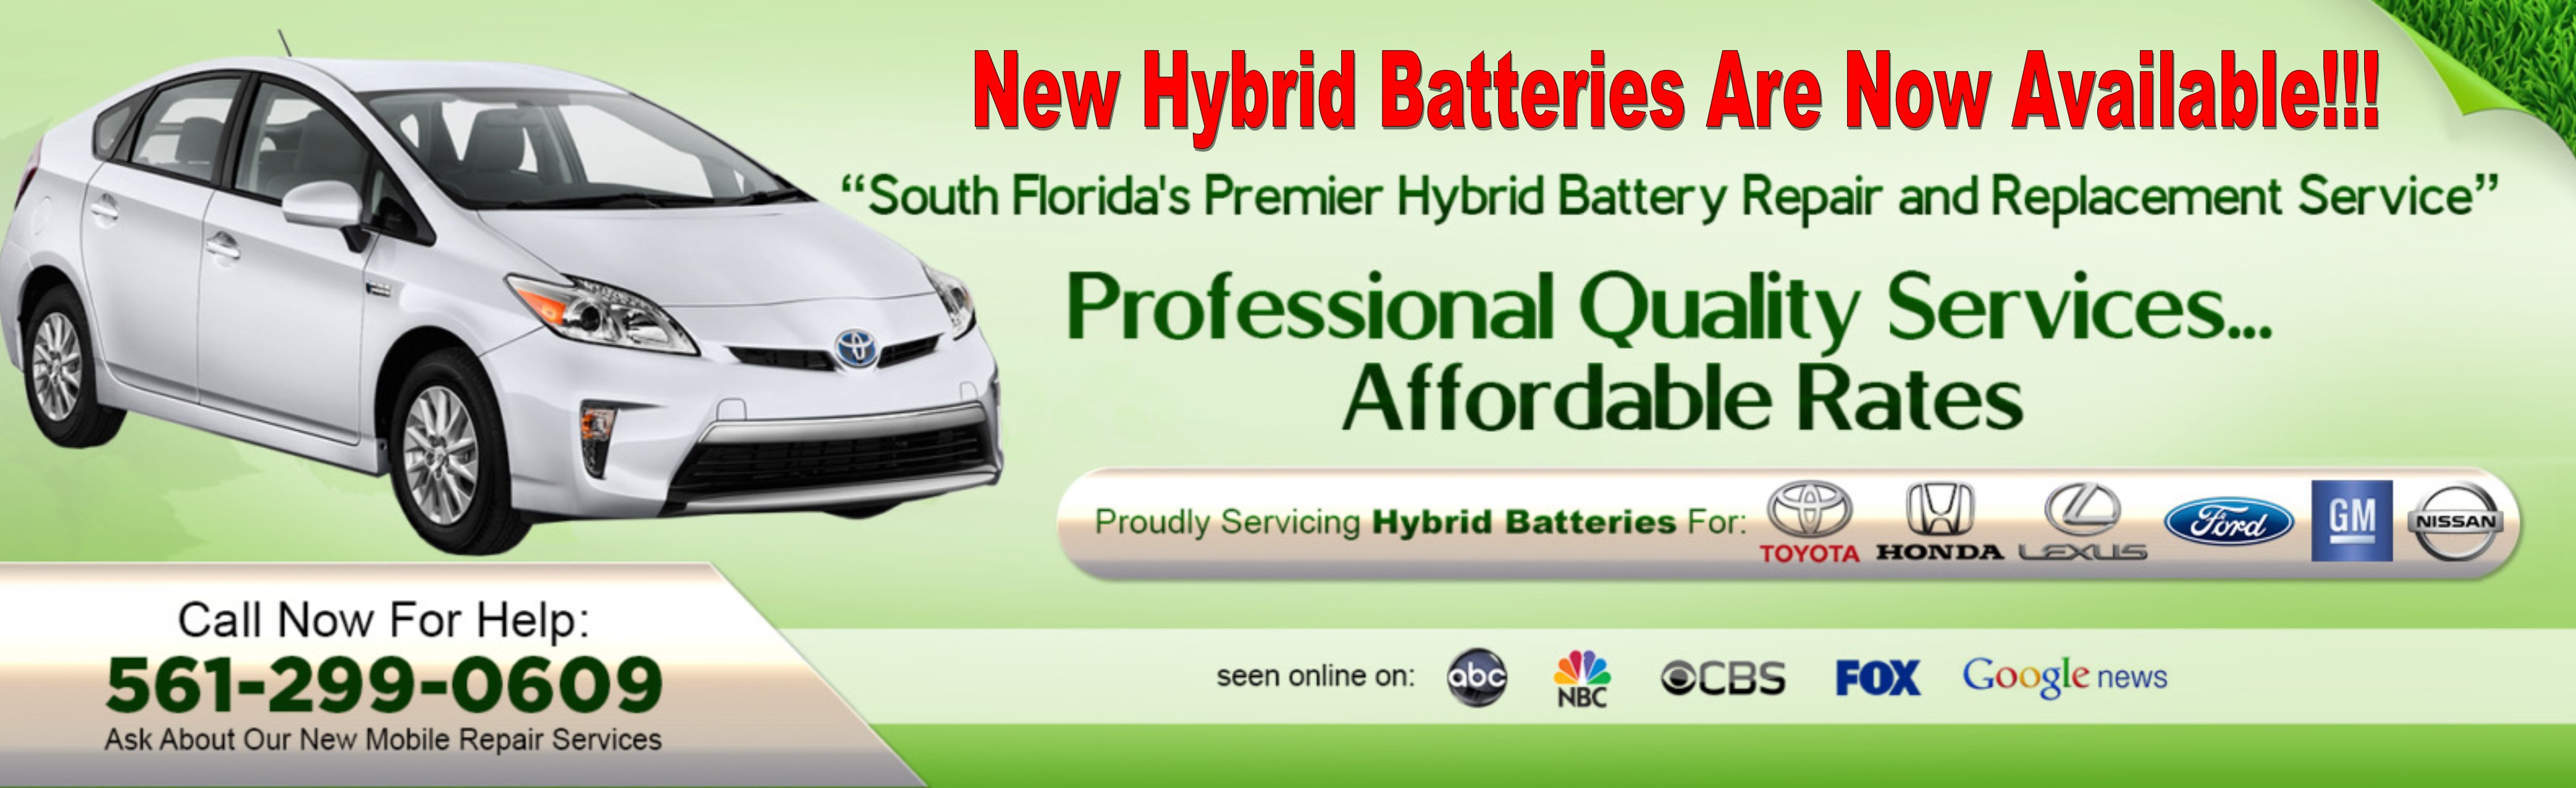 2002 toyota prius hybrid battery replacement